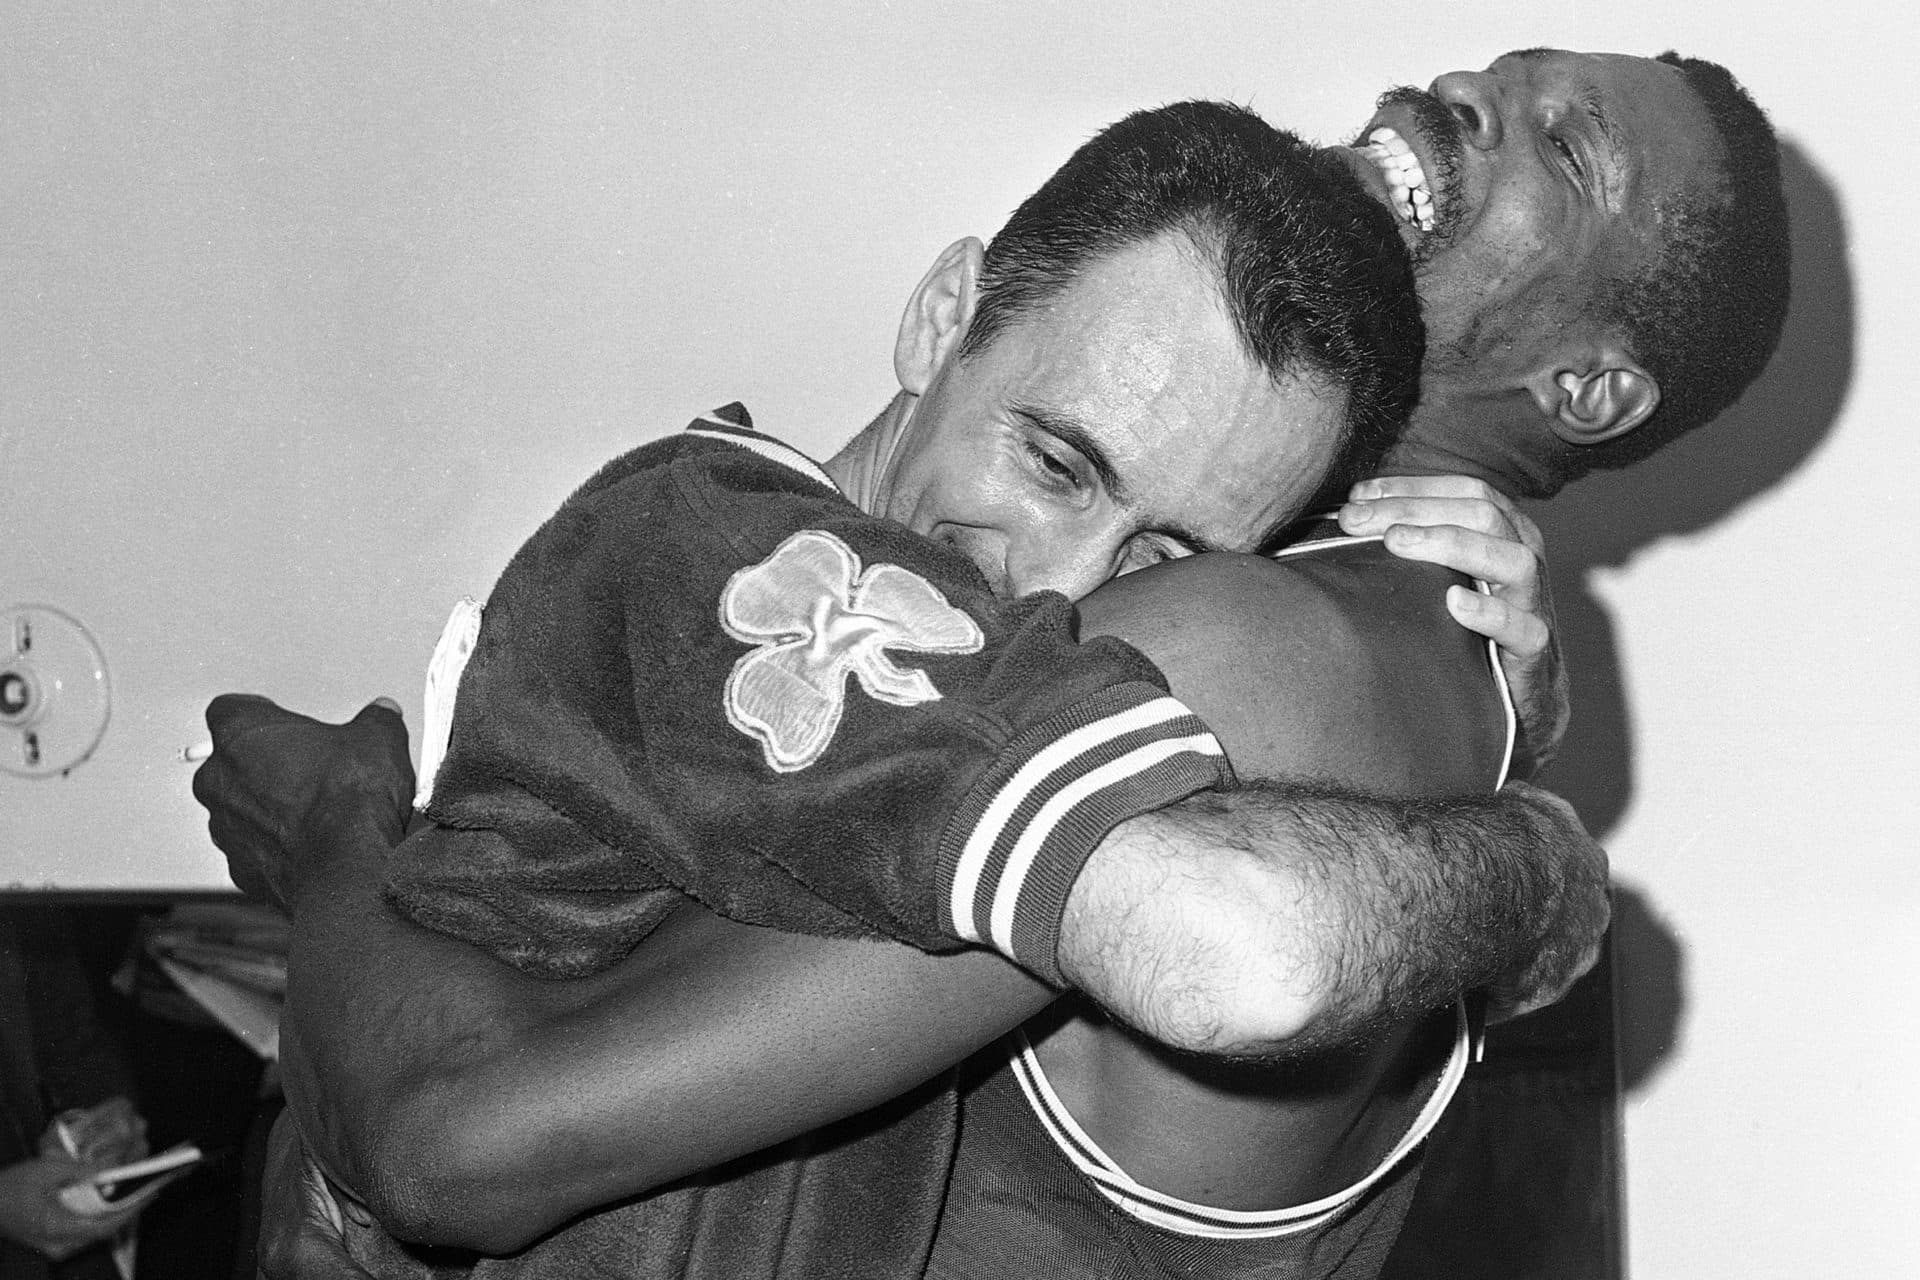 Bill Russell embraces teammate Bob Cousy on April 24, 1963 in the locker room after the Celtics won their fifth consecutive NBA championship, beating the Lakers in Los Angeles. (Ed Widdis/AP)